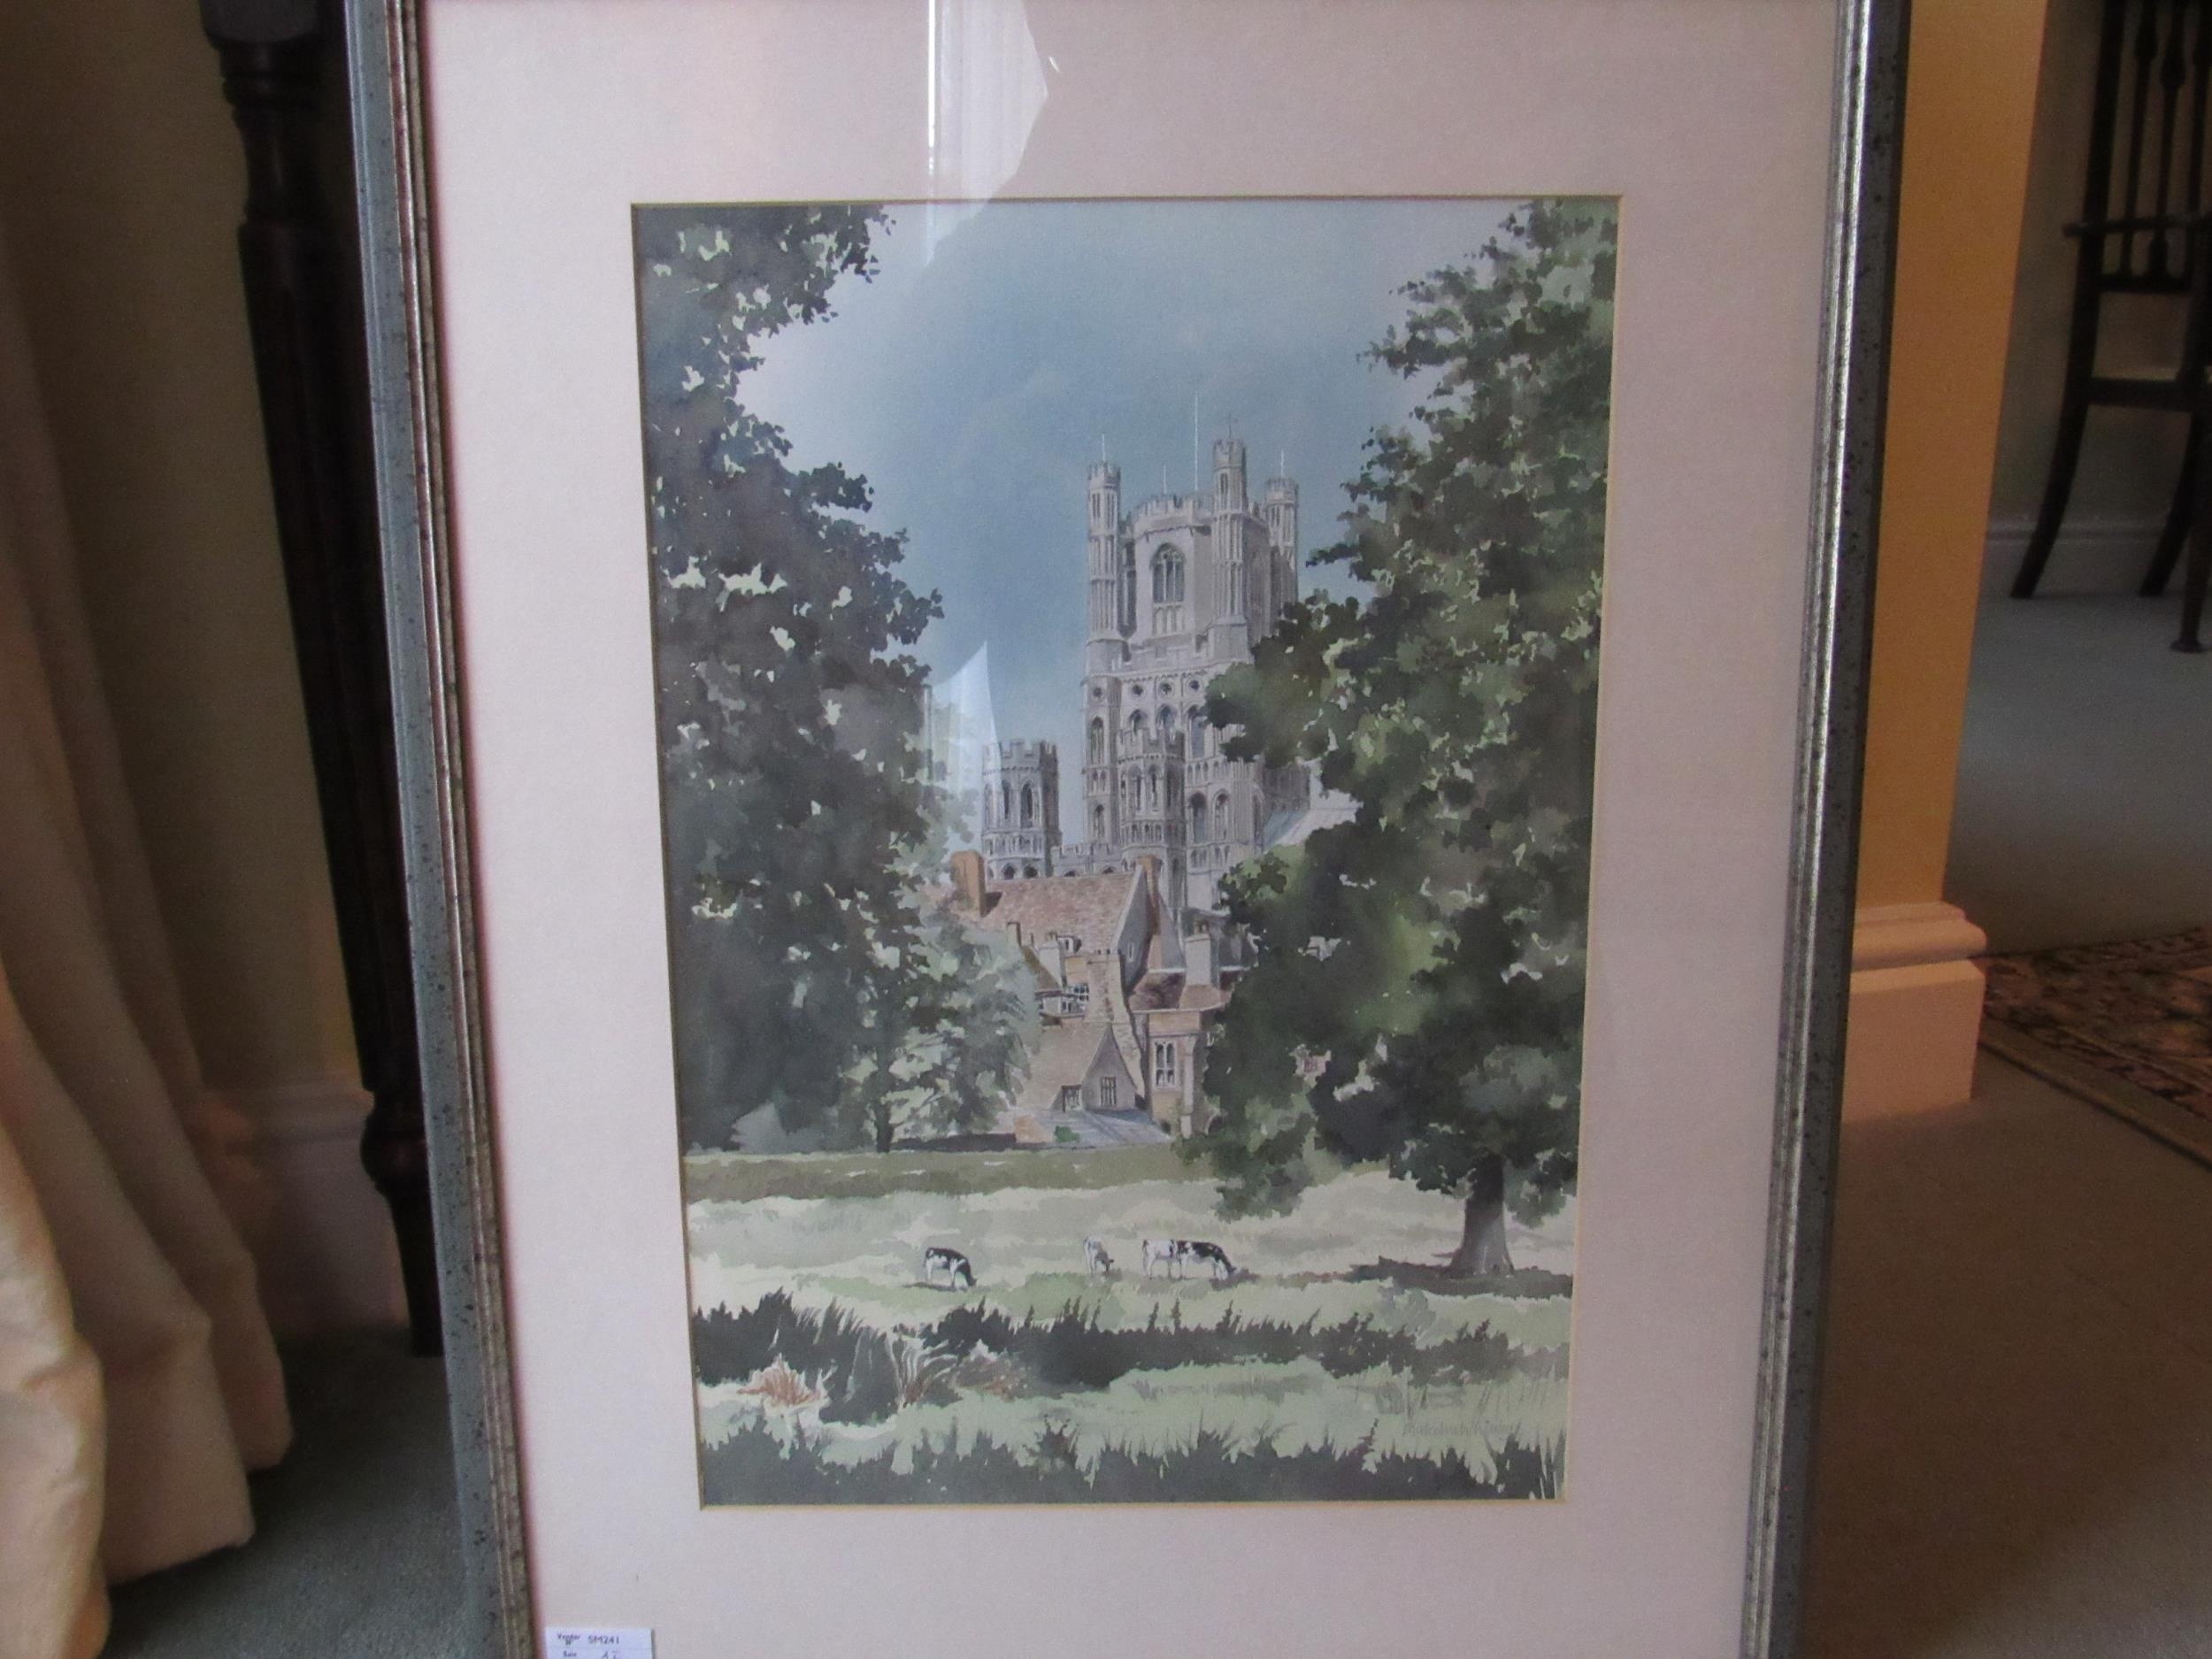 MALCOLM WHITTLEY: "Ely from the meadows", watercolour 44cm x 30cm